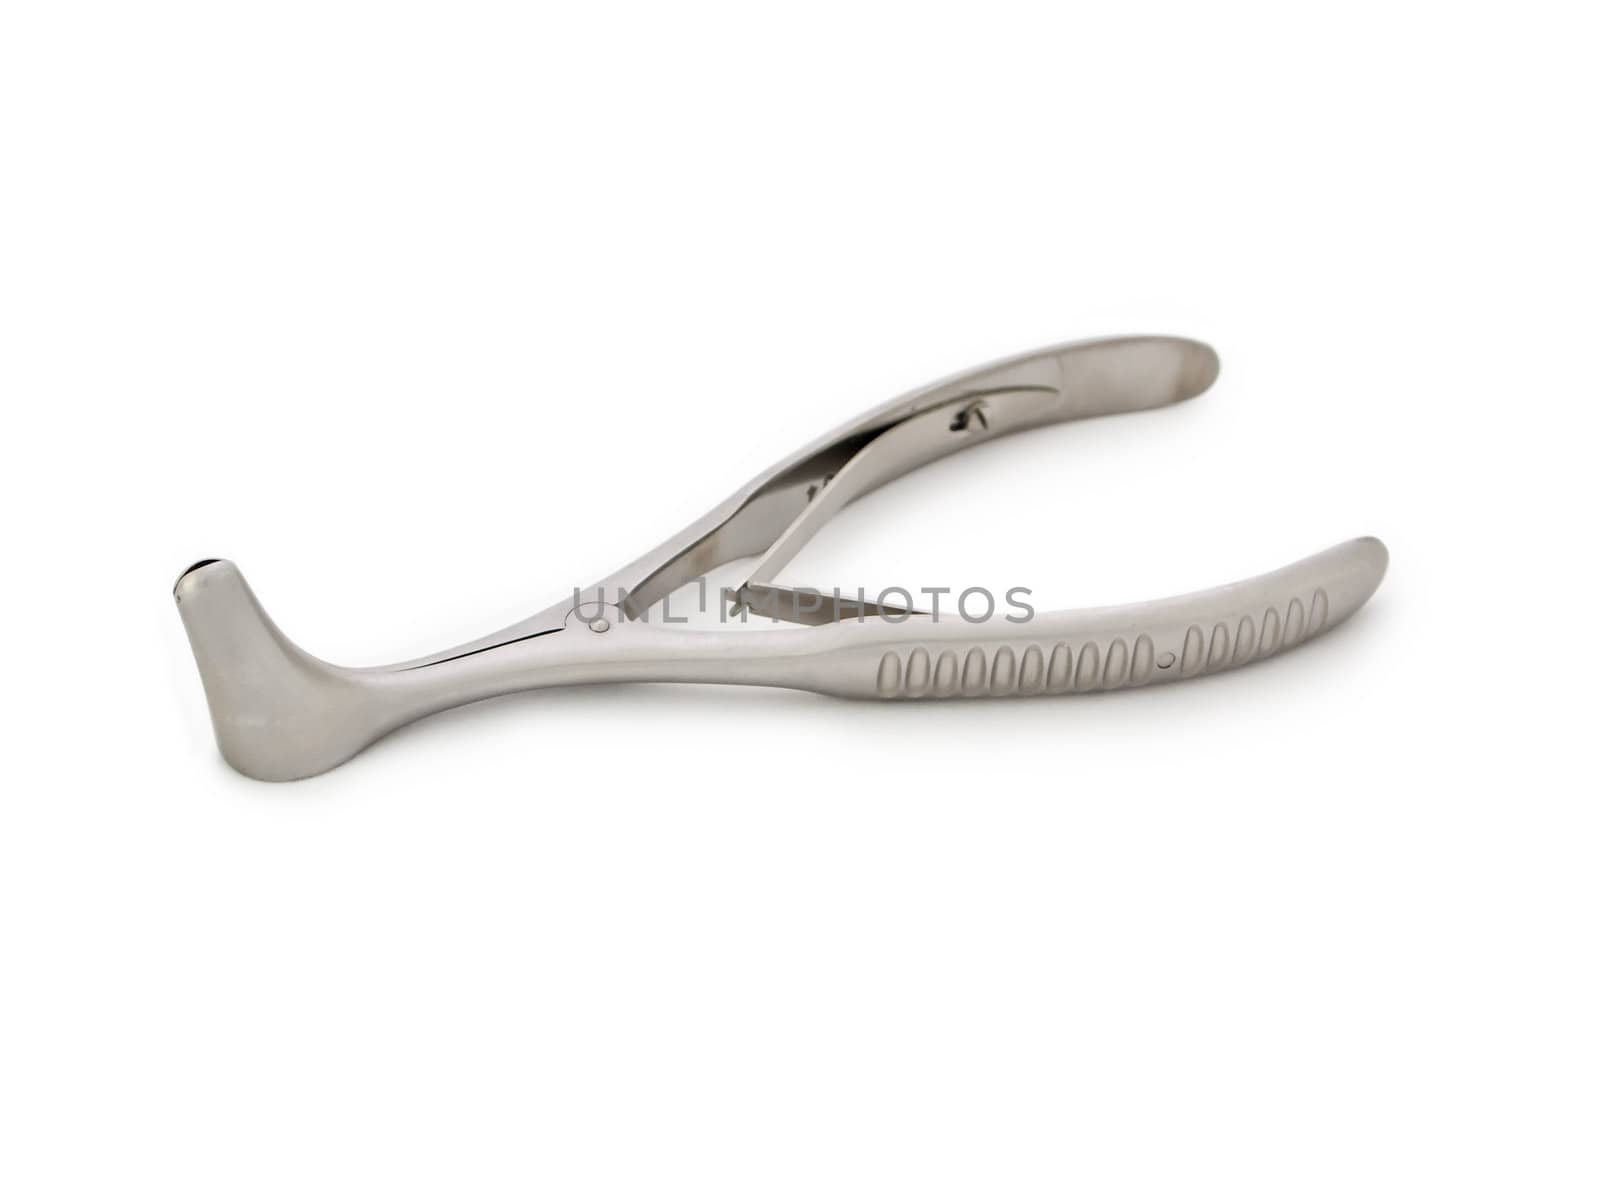 A rhinoscope or nasoscope isolated on a white background. It is a medical instrument used by doctors to look into a patient�s nose.